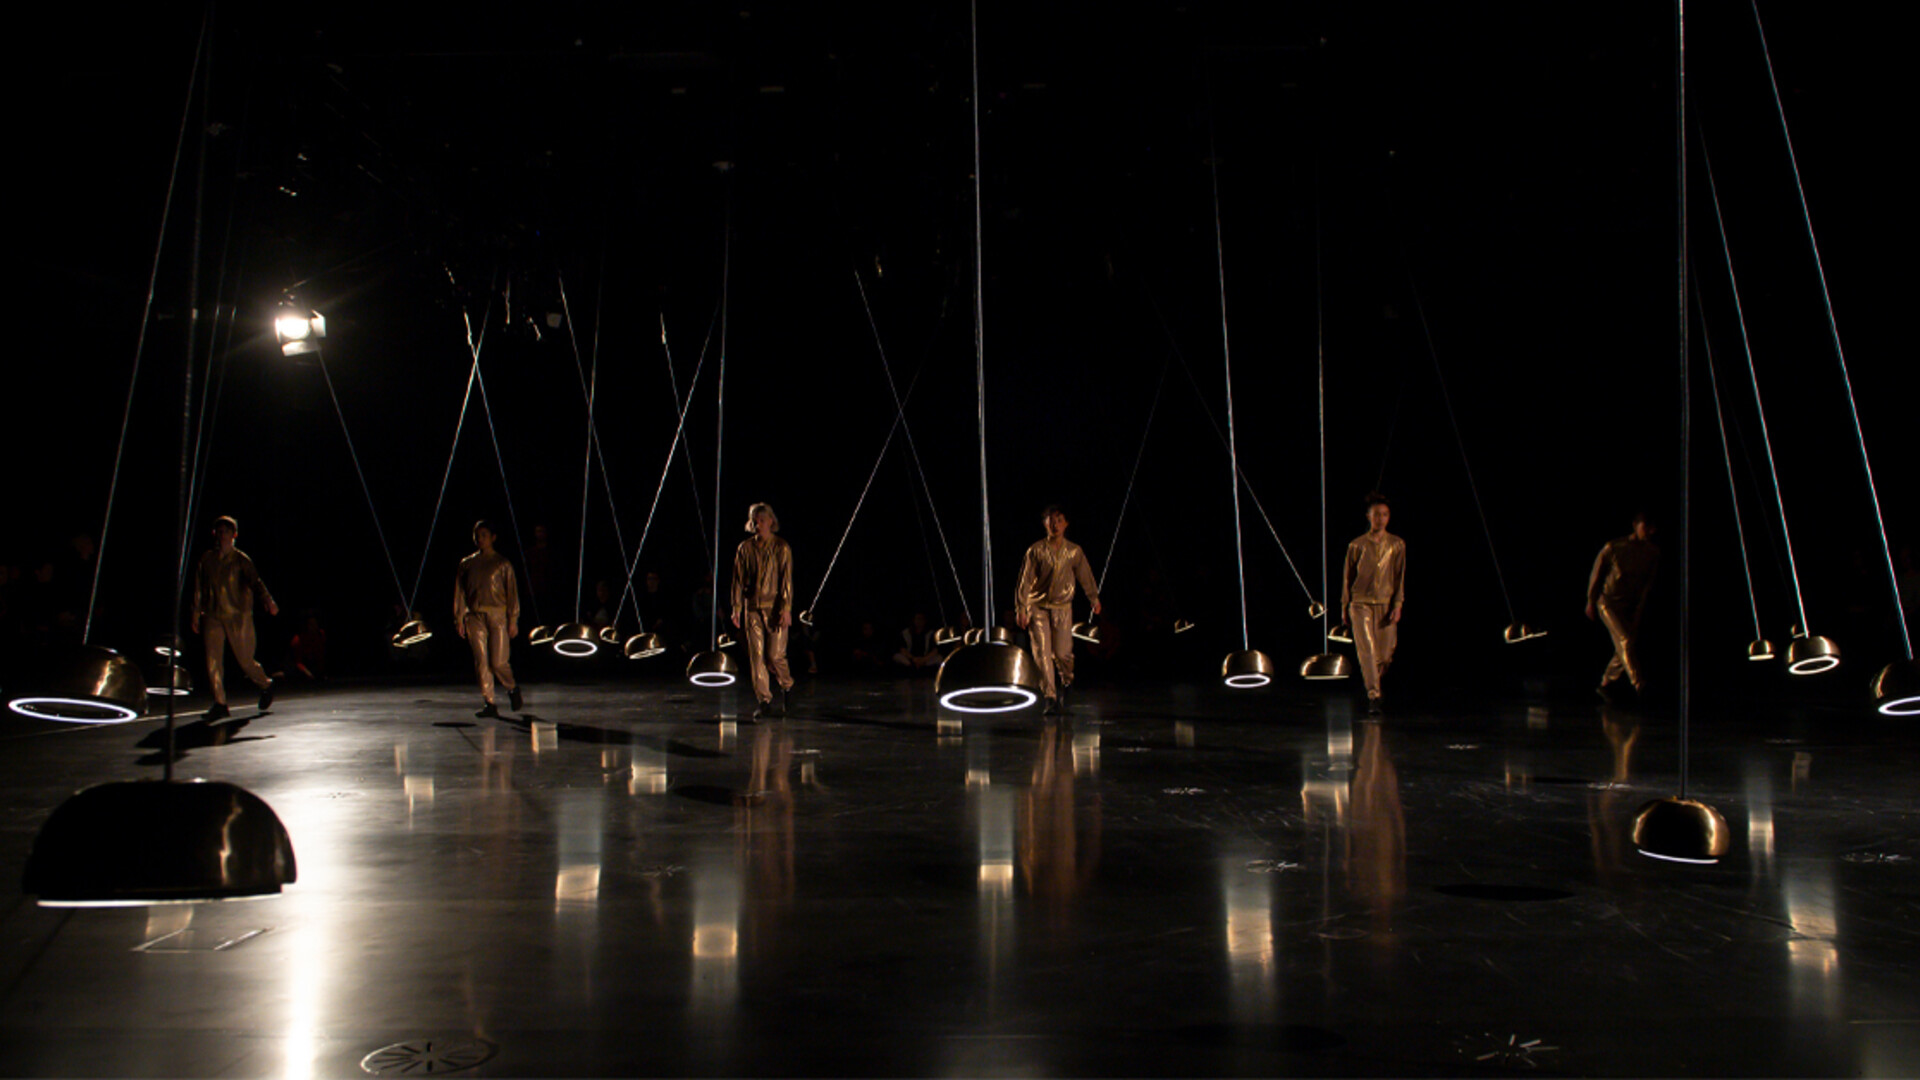 Dancers wearing gold tracksuits move in formation across a dark stage between pendulums.